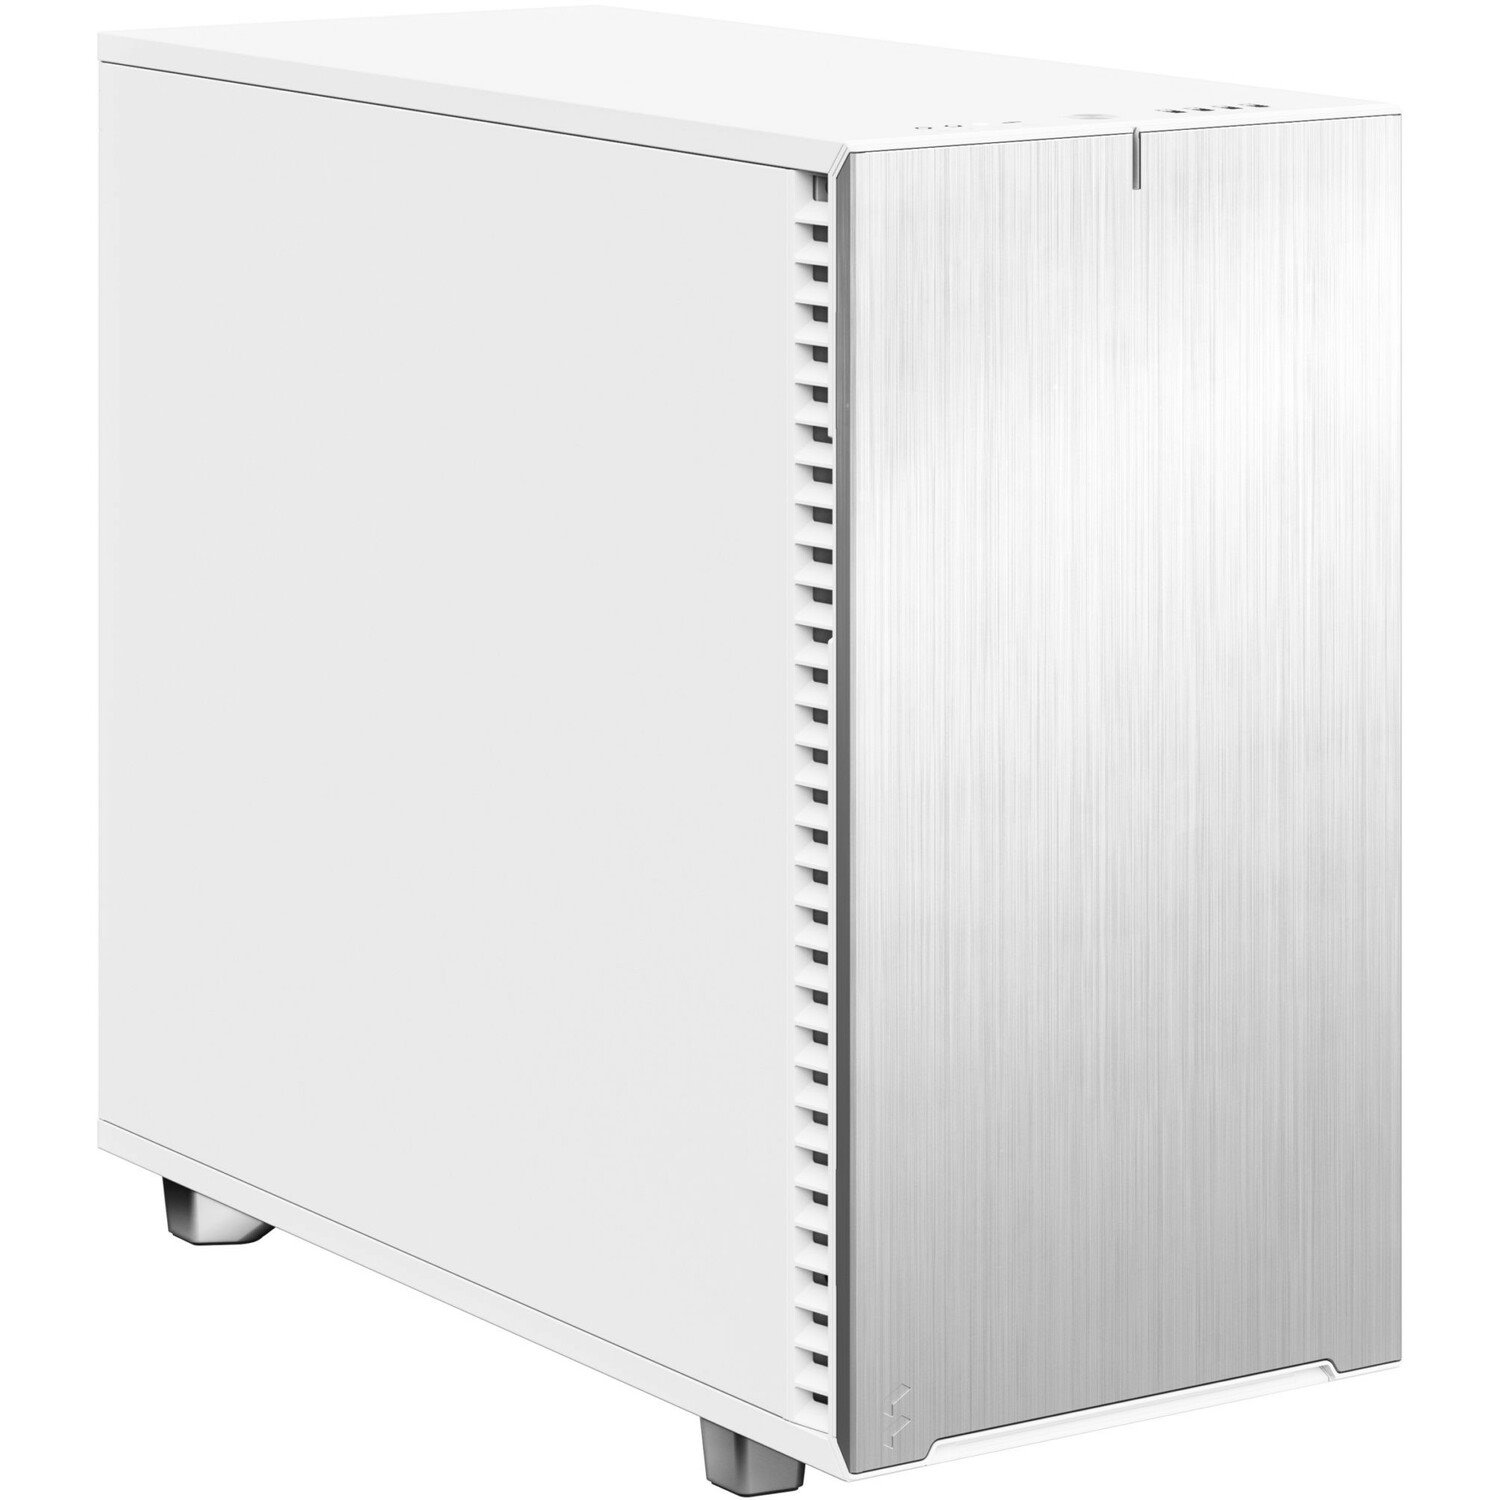 Fractal Design Define 7 Computer Case - ATX Motherboard Supported - Mid-tower - Steel, Anodized Aluminium - White